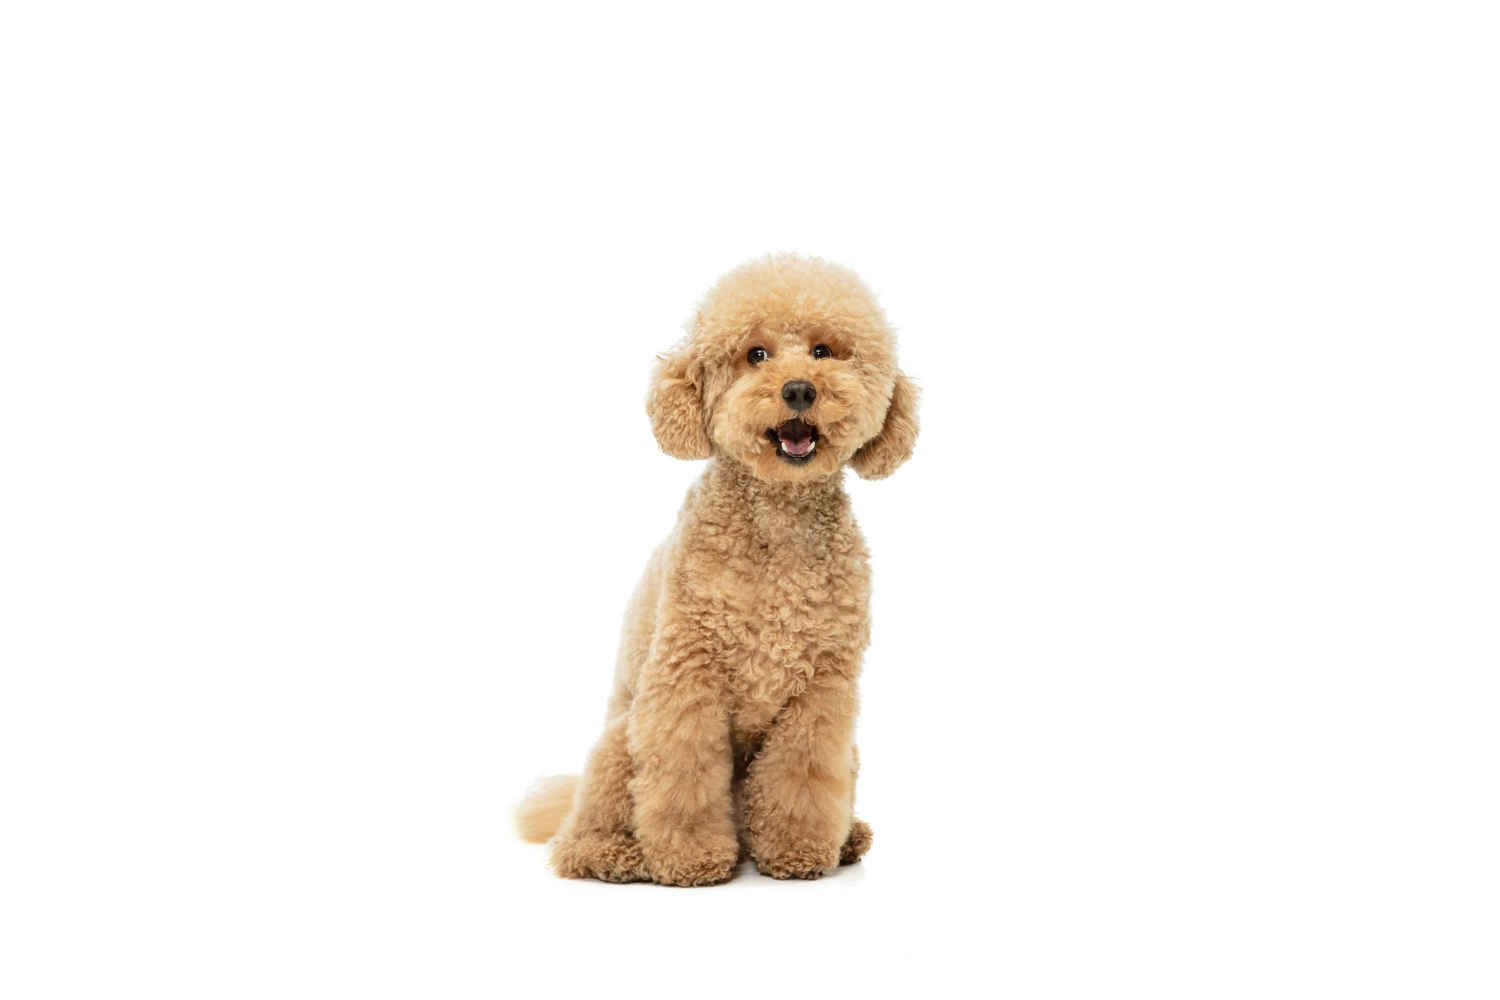 Are Poodles more prone to certain types of eye infections?